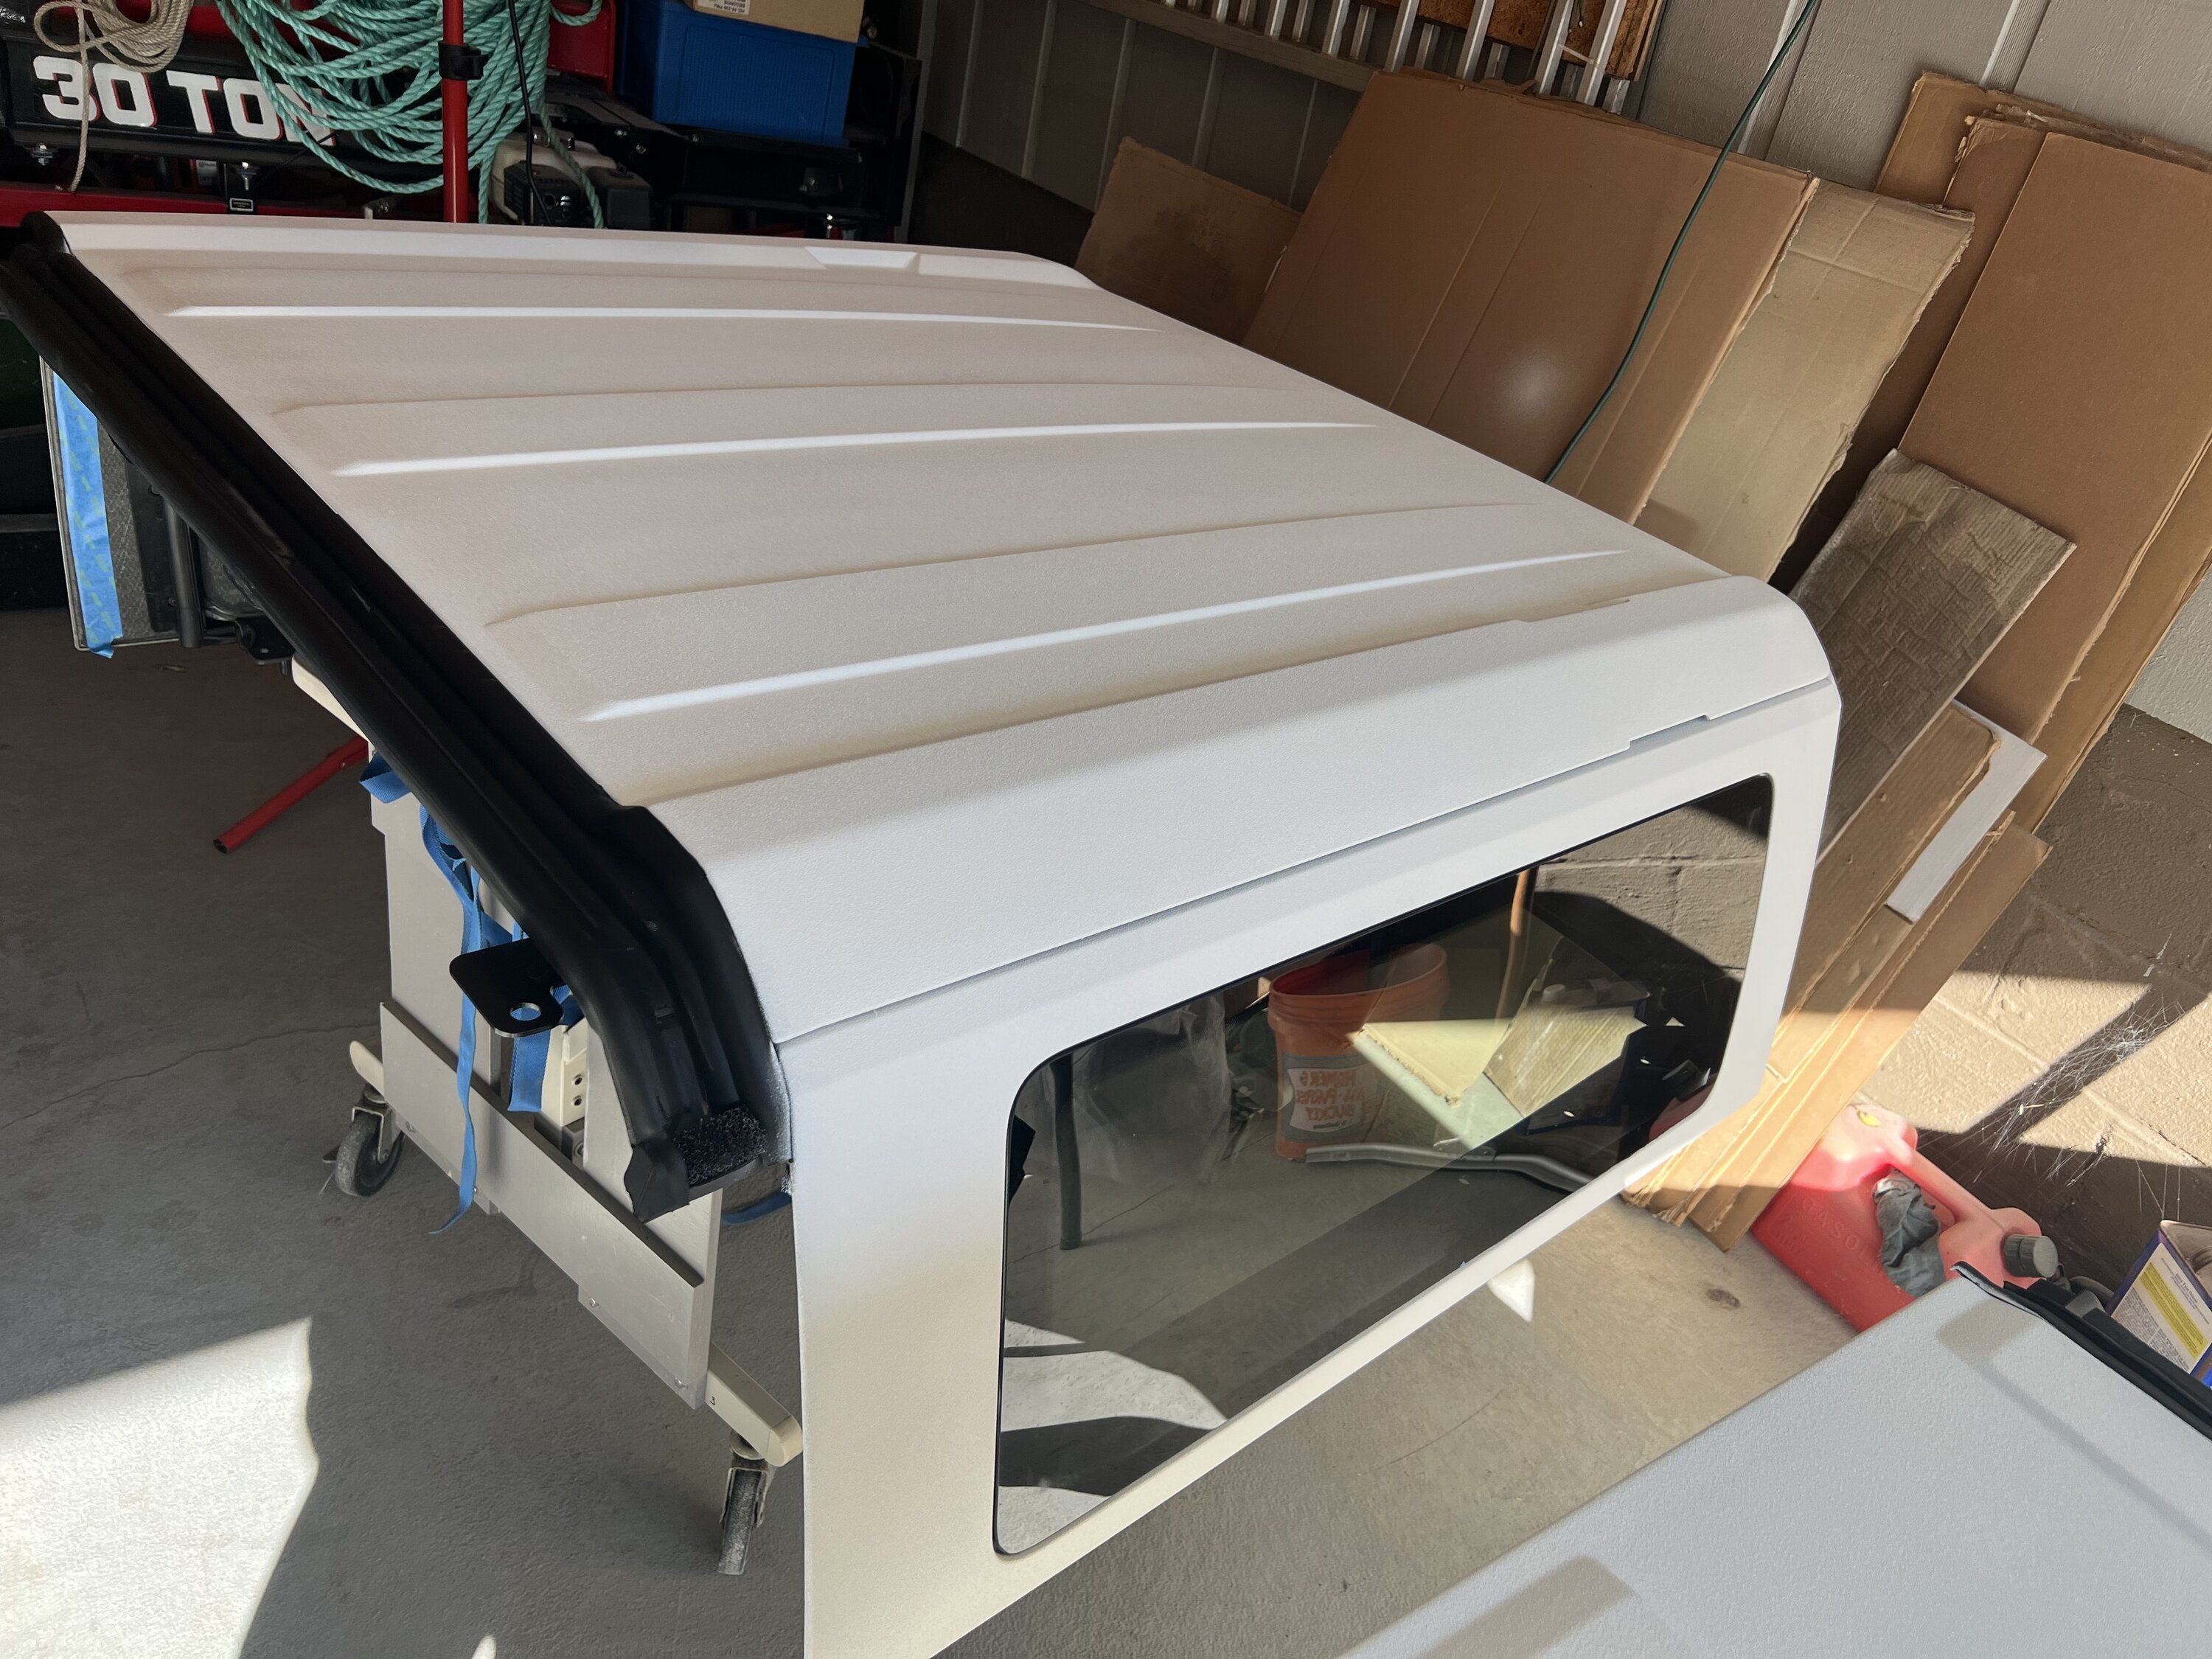 Ford Bronco MIC hard top painted white using Raptor Spray Liner:  DIY how-to and photos 11375887-9F68-43A0-AED3-9D1C2956EC26